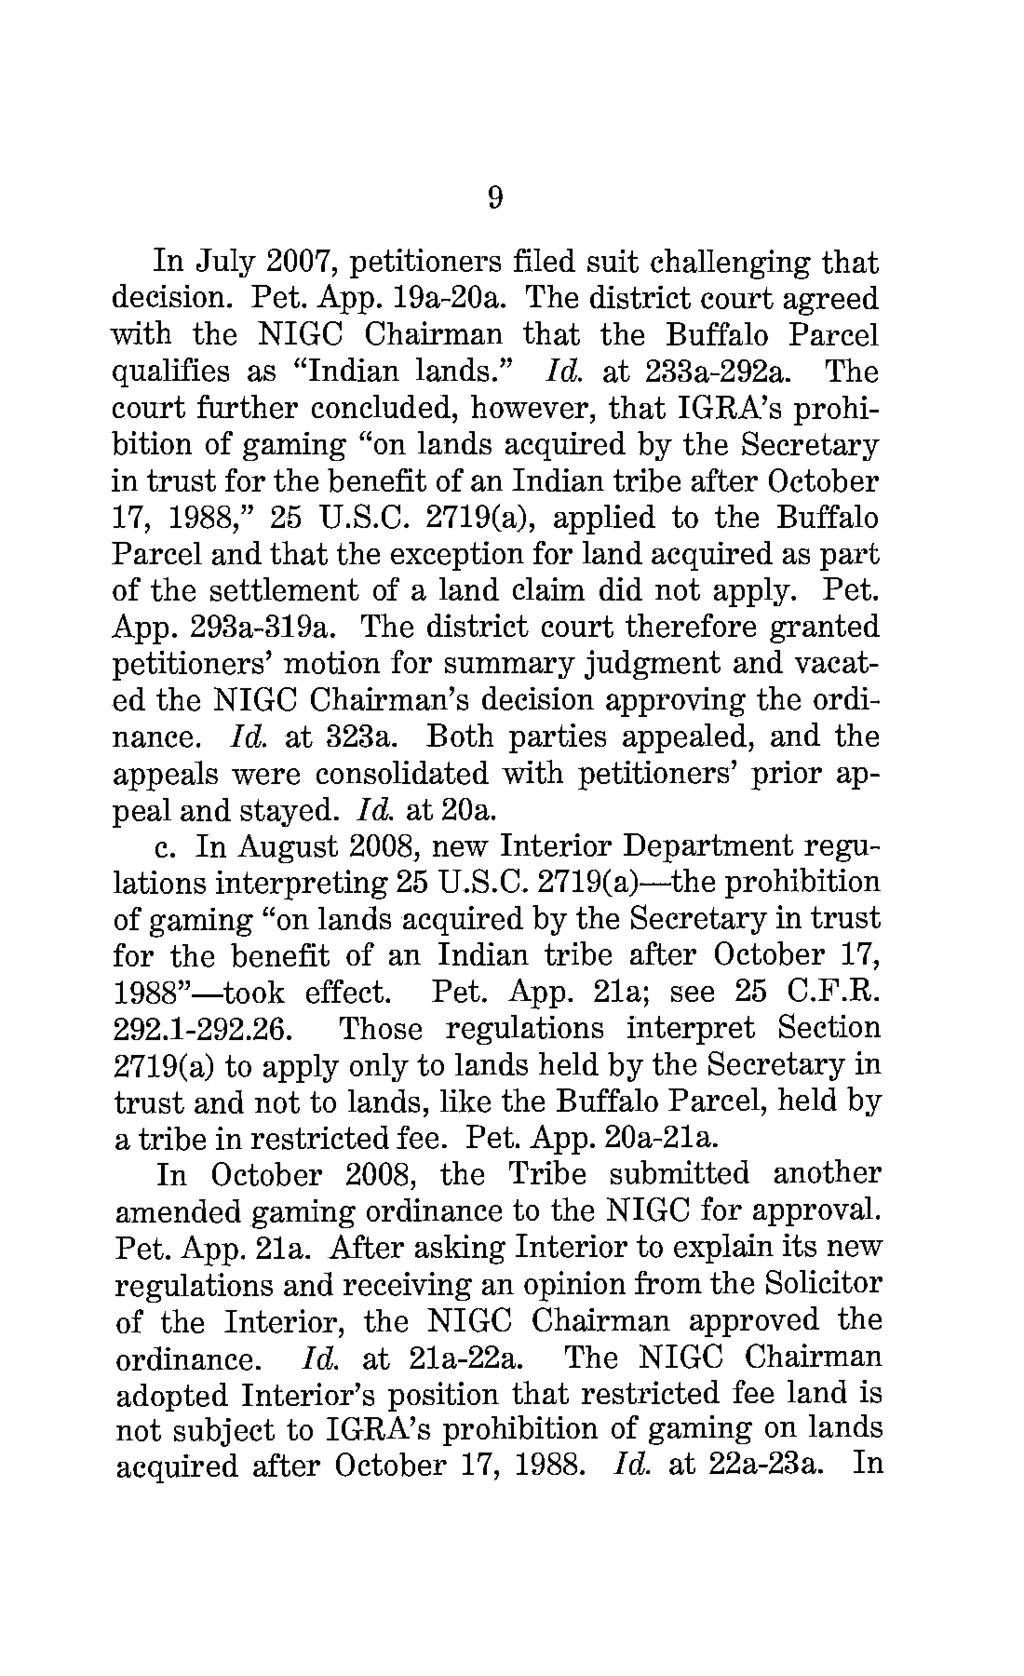 9 In July 2007, petitioners filed suit challenging that decision. Pet. App. 19a-20a. The district court agreed with the NIGC Chairman that the Buffalo Parcel qualifies as "Indian lands." Id.